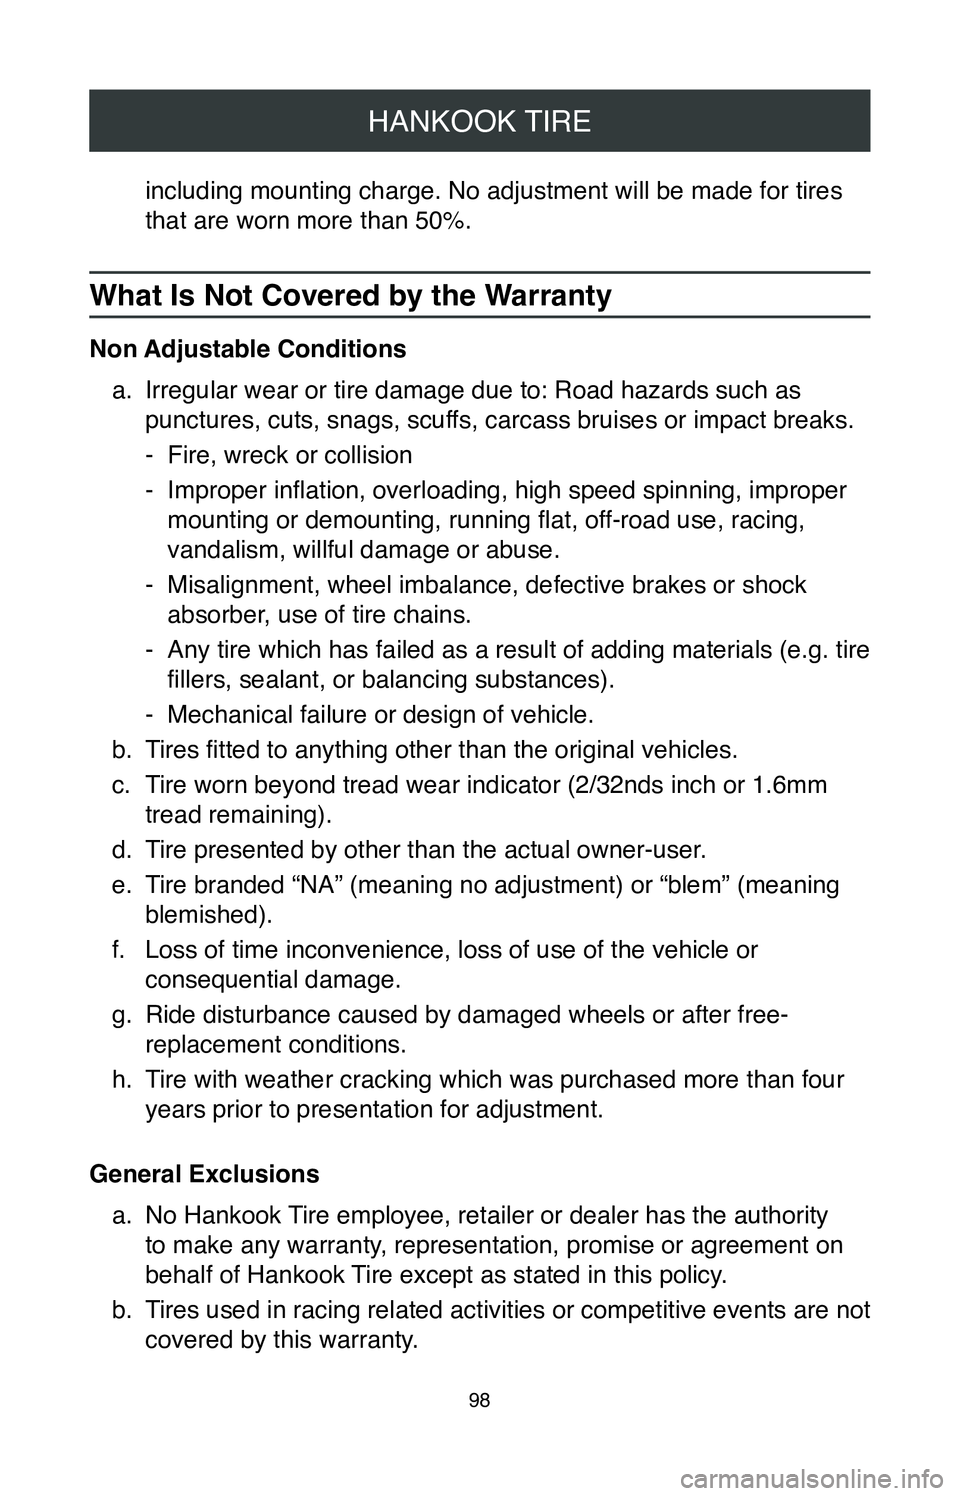 TOYOTA AVALON HYBRID 2020  Warranties & Maintenance Guides (in English) HANKOOK TIRE
98
including mounting charge. No adjustment will be made for tires 
that are worn more than 50%.
What Is Not Covered by the Warranty
Non Adjustable Conditionsa.
 Irregular wear or tire da